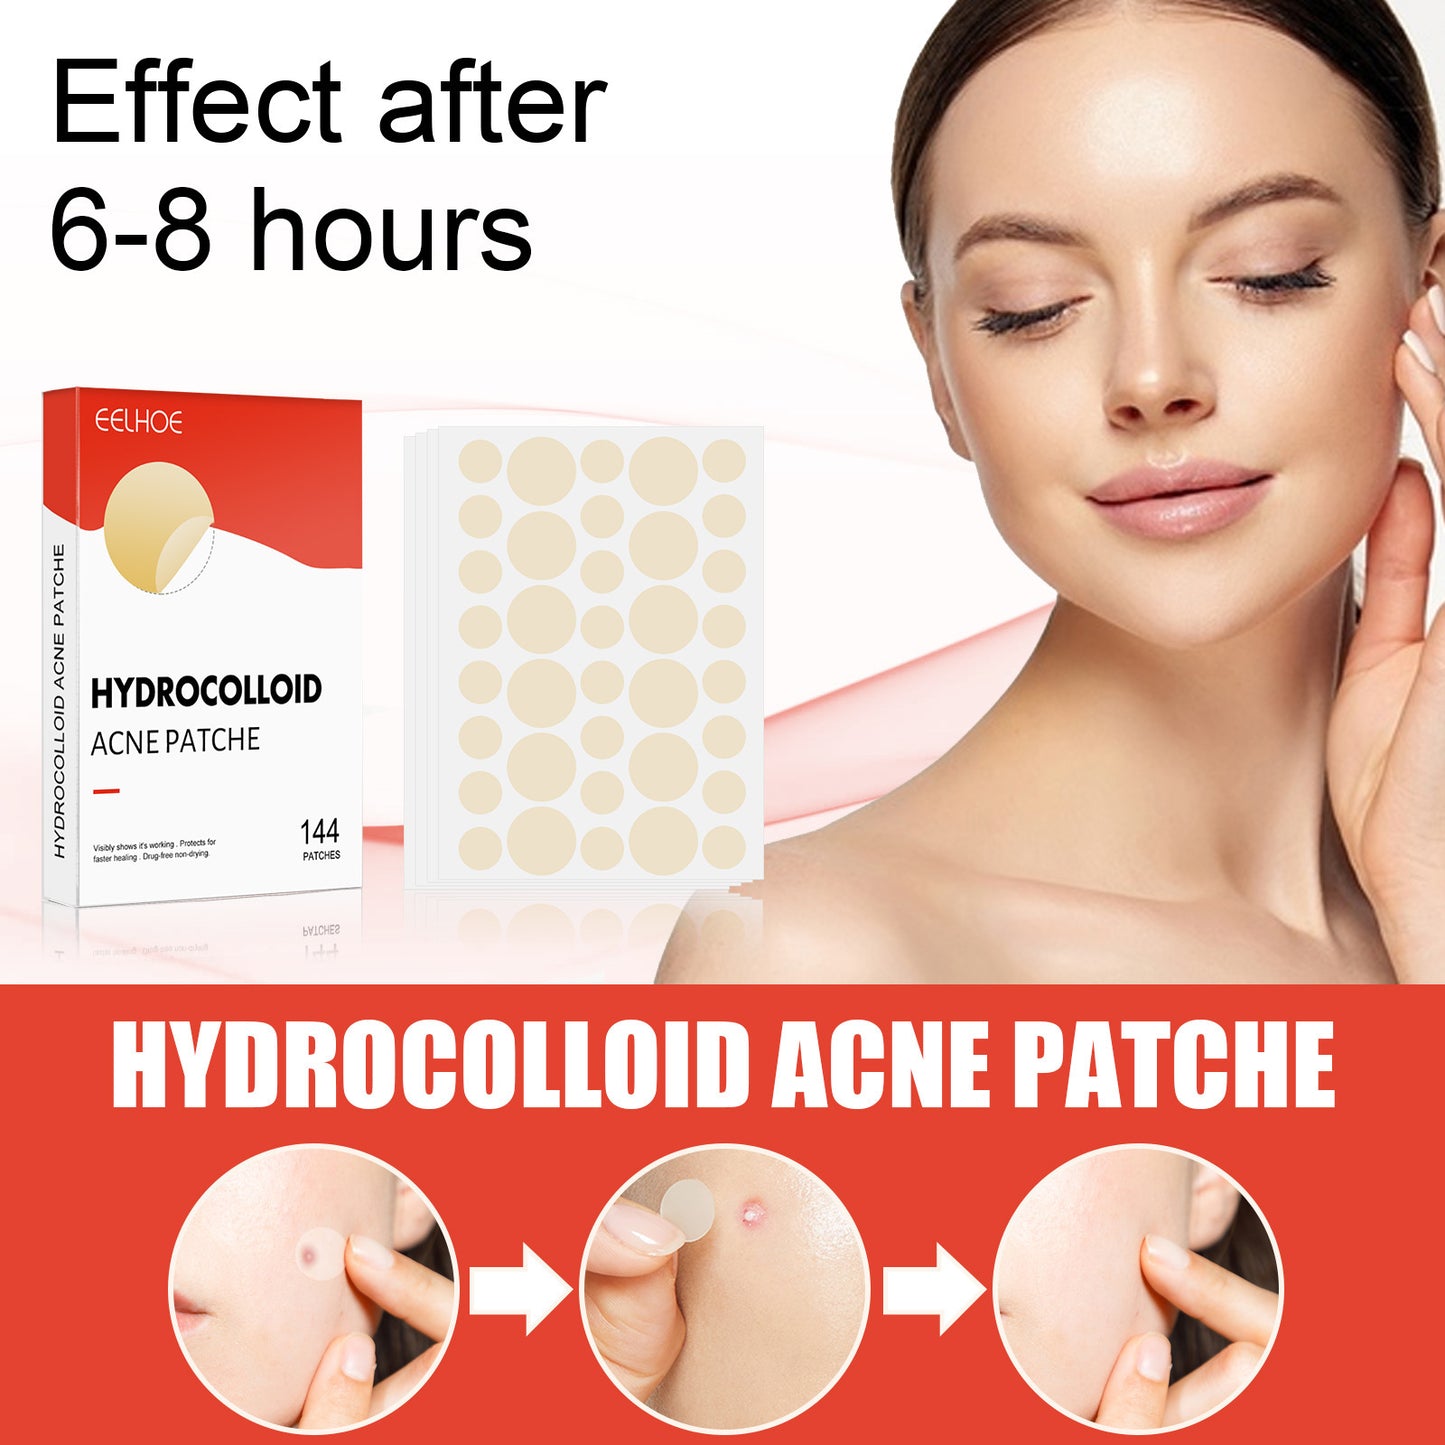 Hydrocolloid Acne Patch Makeup Closed Acne Patch